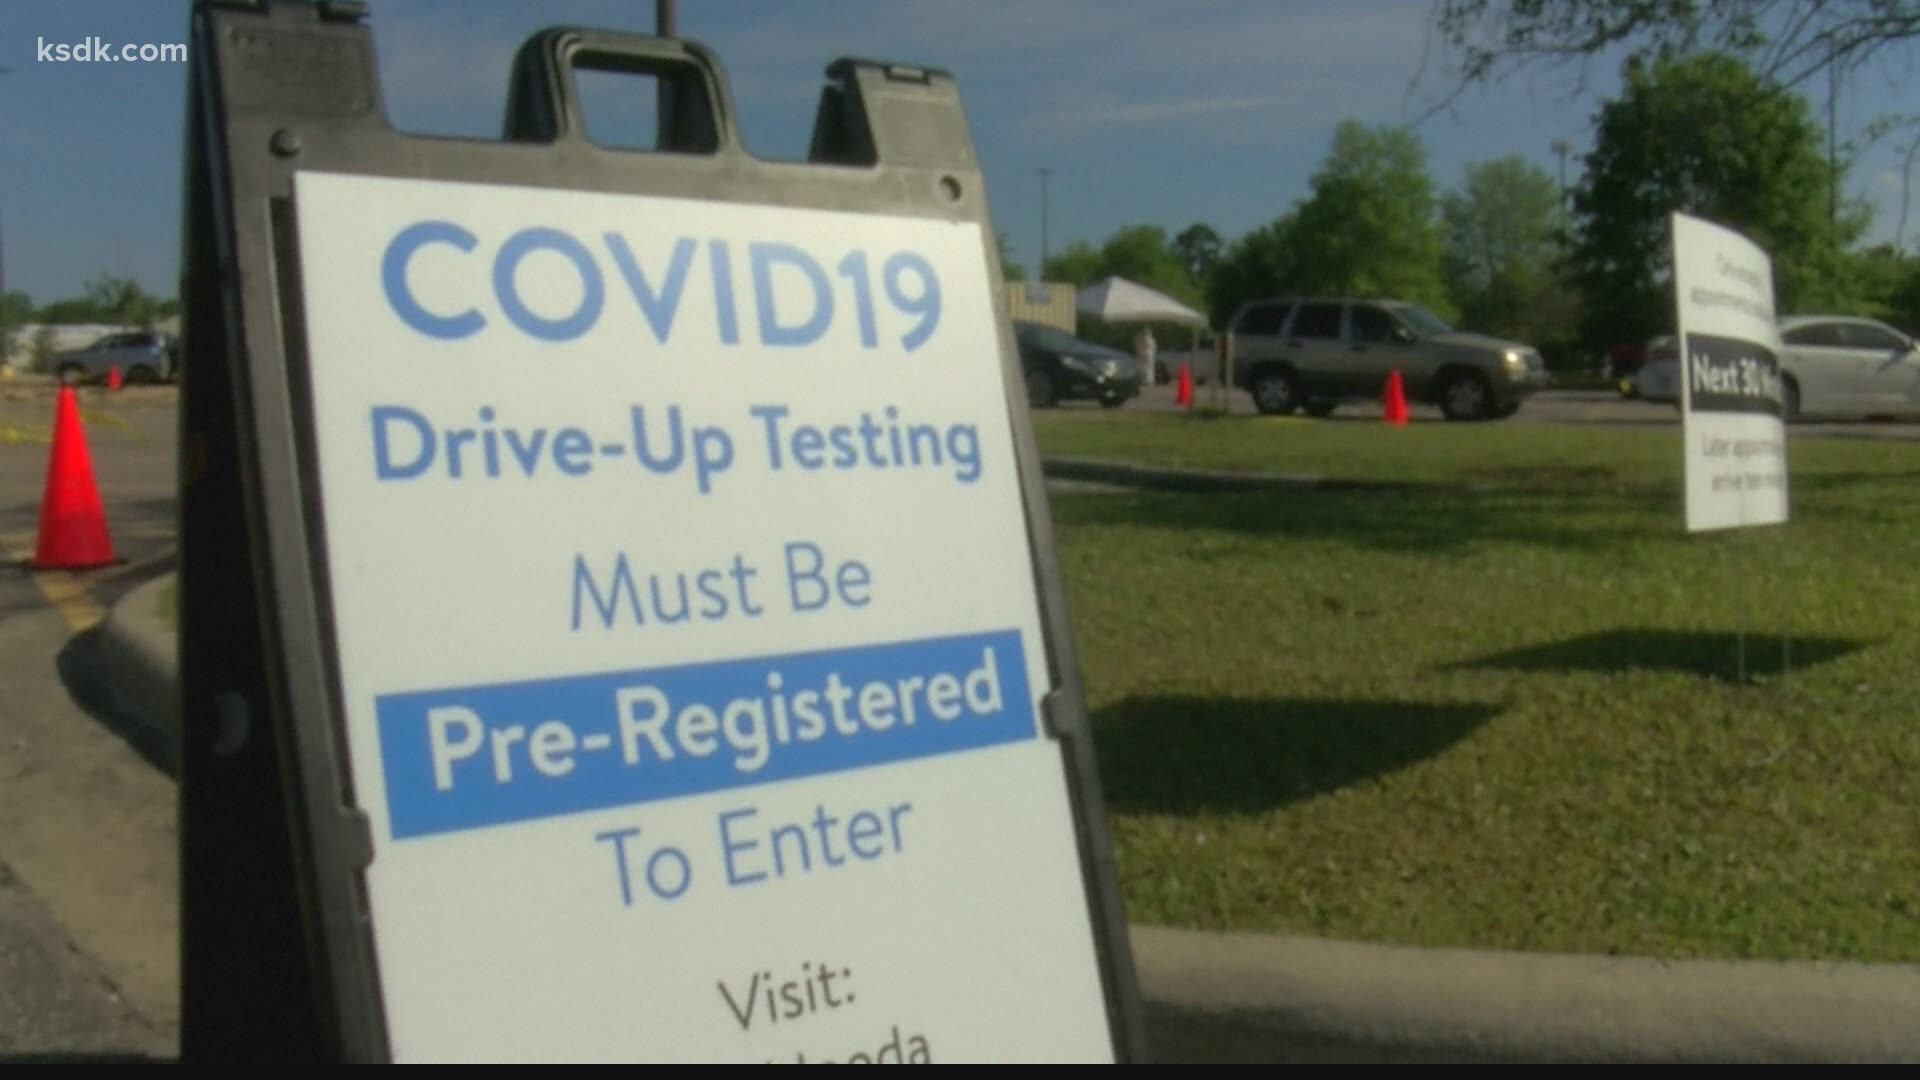 The CDC guidelines say even if you are vaccinated and you're experiencing symptoms, it's advised to get a COVID-19 test